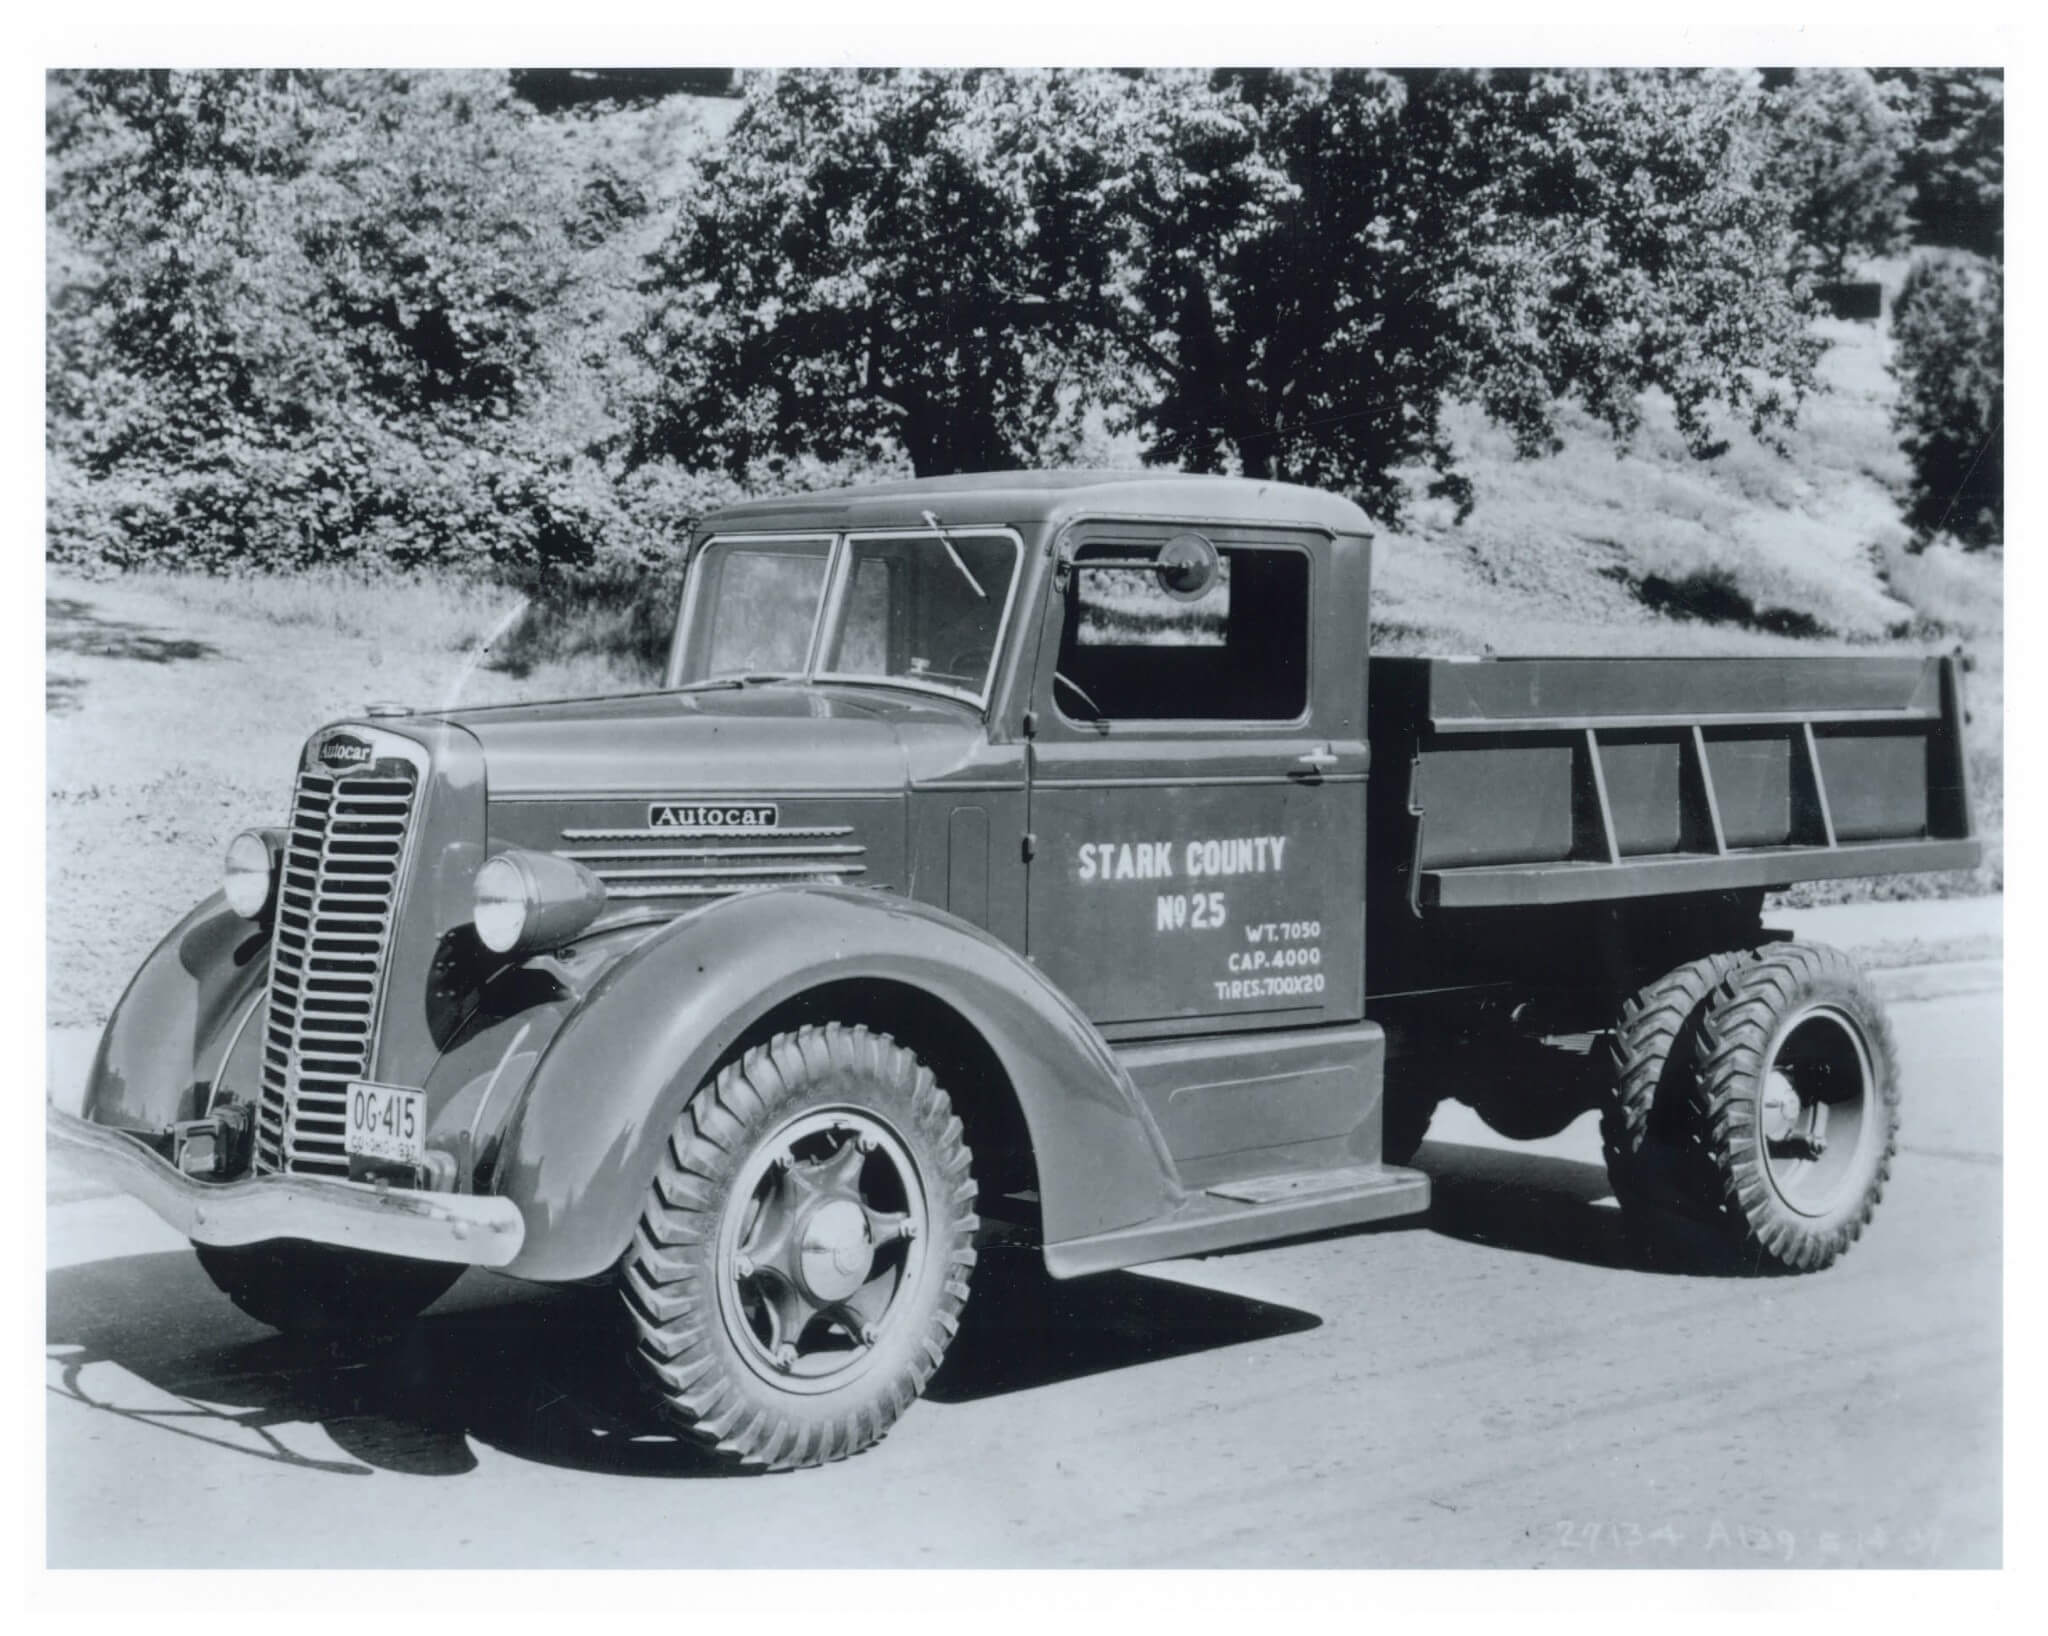 The 1930s found truck makers following the styling lead of their automotive cousins. Note the unique front end styling cab treatment on this county-operated Autocar medium-duty dumptruck.